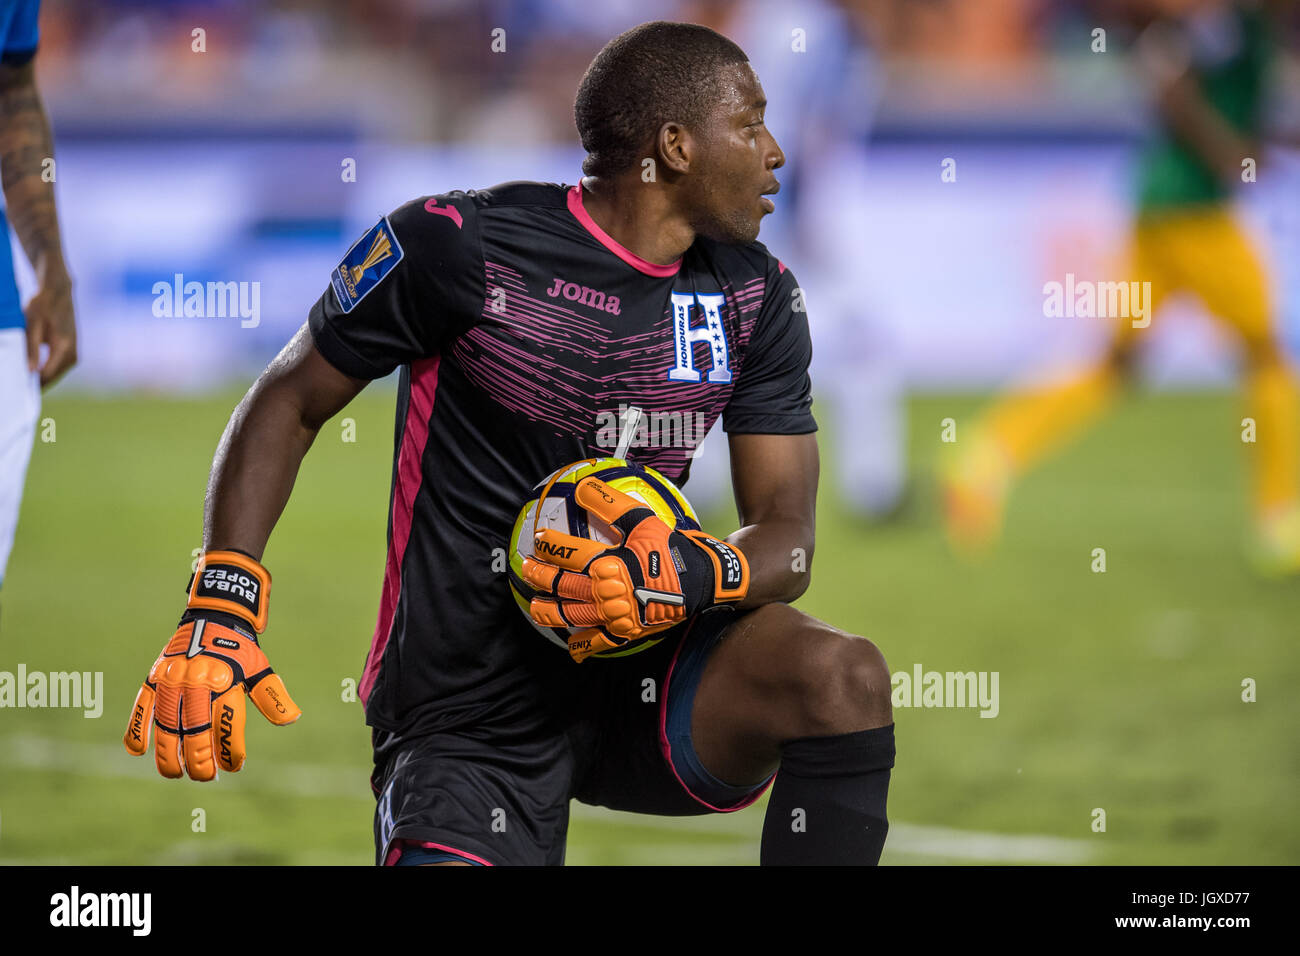 Houston, Texas, USA. 11th July, 2017. Honduras goalkeeper Luis LÃ³pez (1) controls the ball during the 1st half of an international CONCACAF Gold Cup soccer match between Honduras and French Guiana at BBVA Compass Stadium in Houston, TX on July 11th, 2017. The game ended in a 0-0 draw. Credit: Trask Smith/ZUMA Wire/Alamy Live News Stock Photo